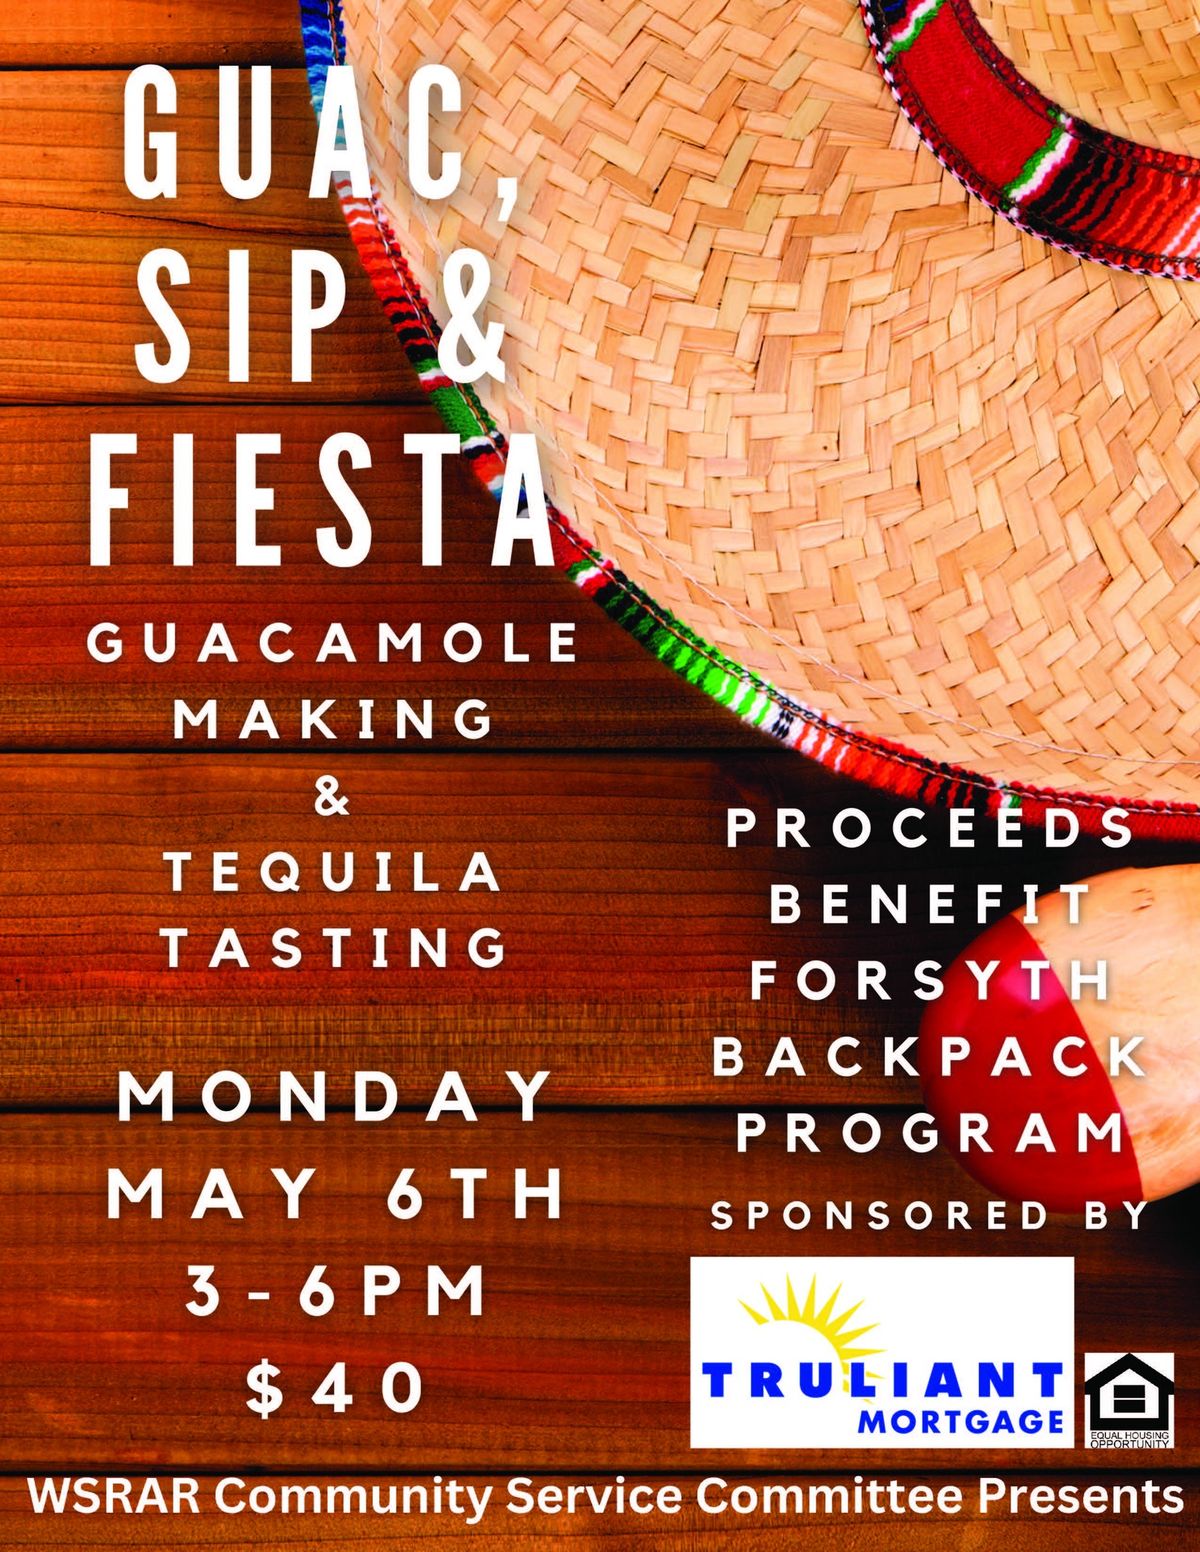 Guacamole Making & Tequila Tasting FUNDRAISER